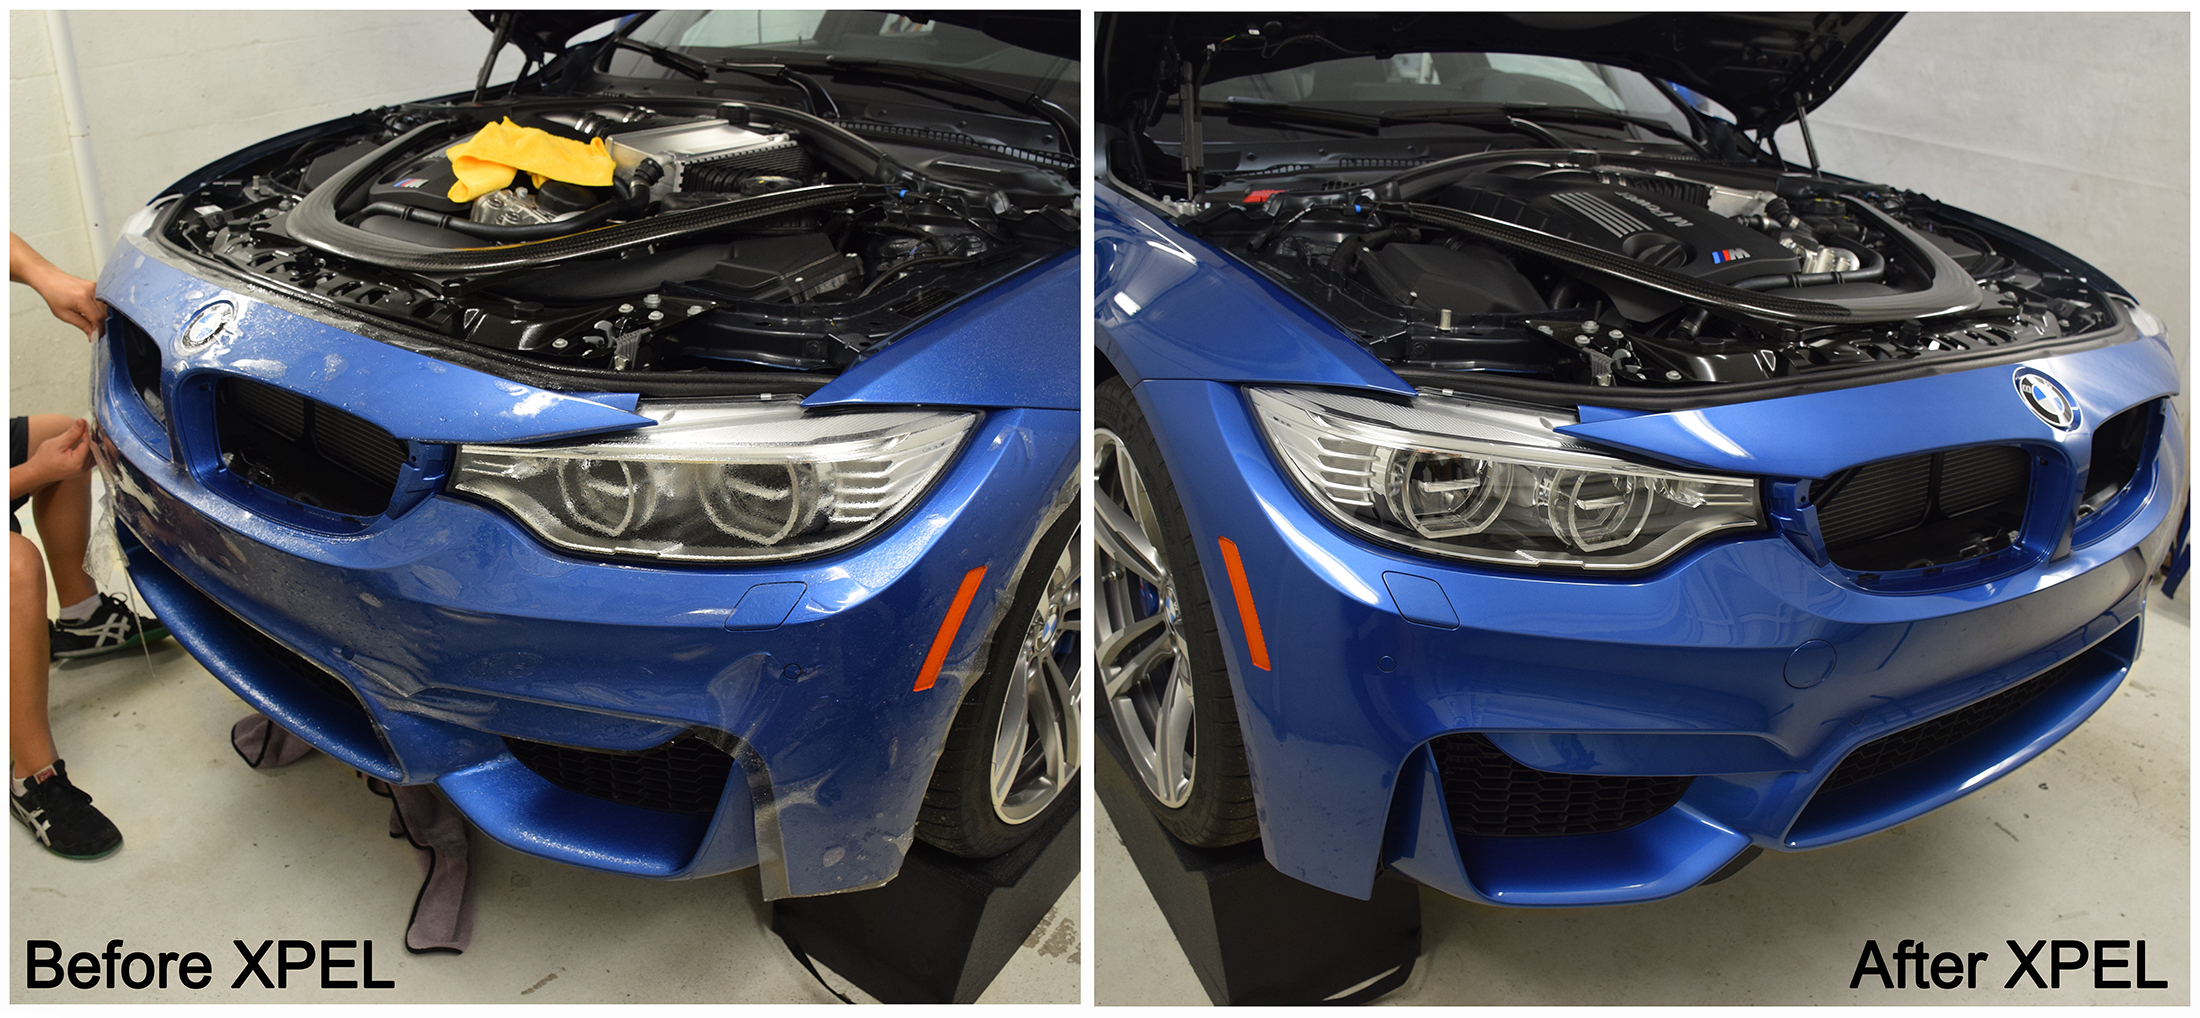 XPEL-2016-BMW-M3-BEFORE-AFTER-ULTIMATE-INSTALLATION-SCHEER-DETAILING